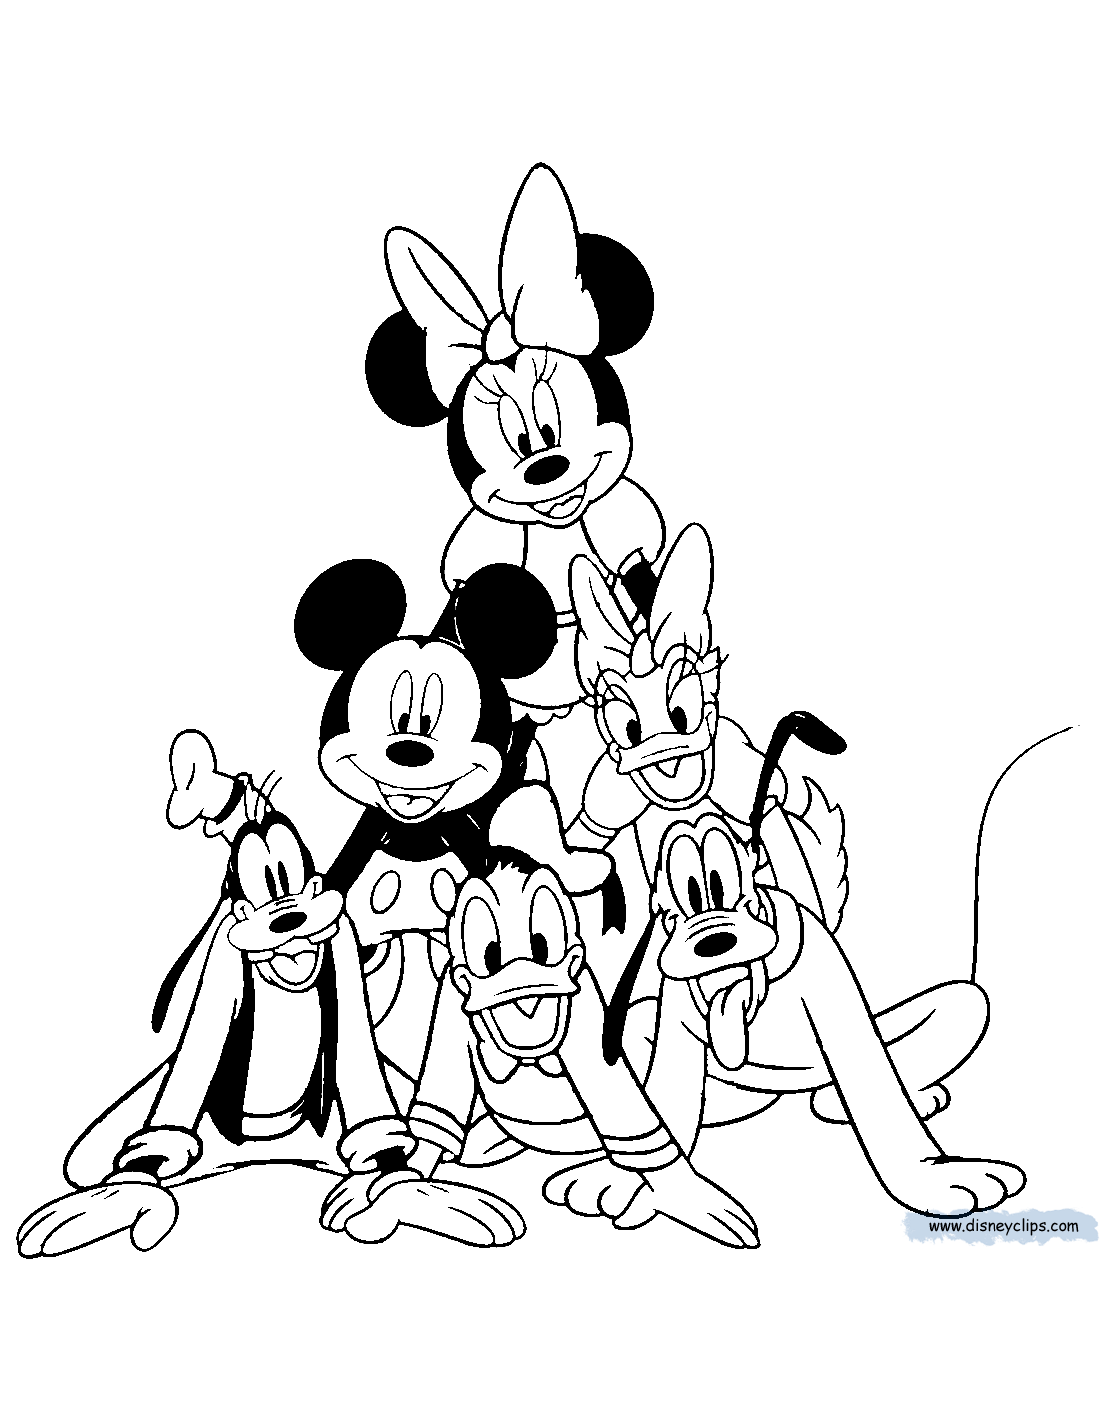 mickey and friends coloring pages mickey mouse friends coloring pages 6 disneyclipscom mickey pages and coloring friends 